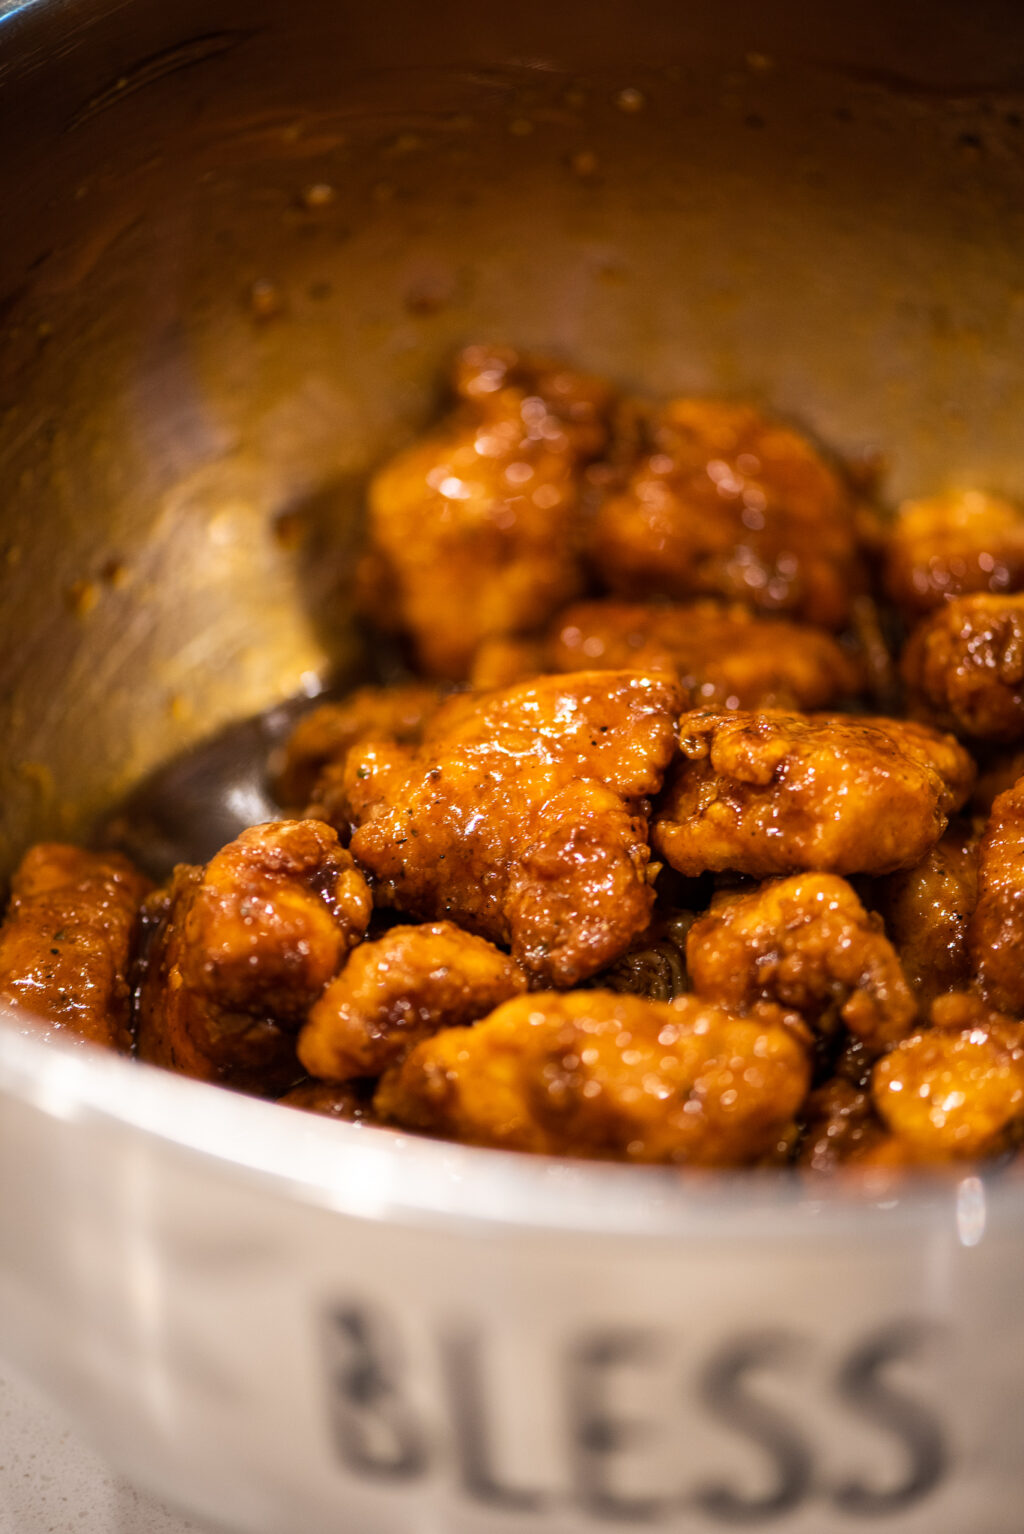 tossing fried chicken nuggets in homemade teriyaki sauce